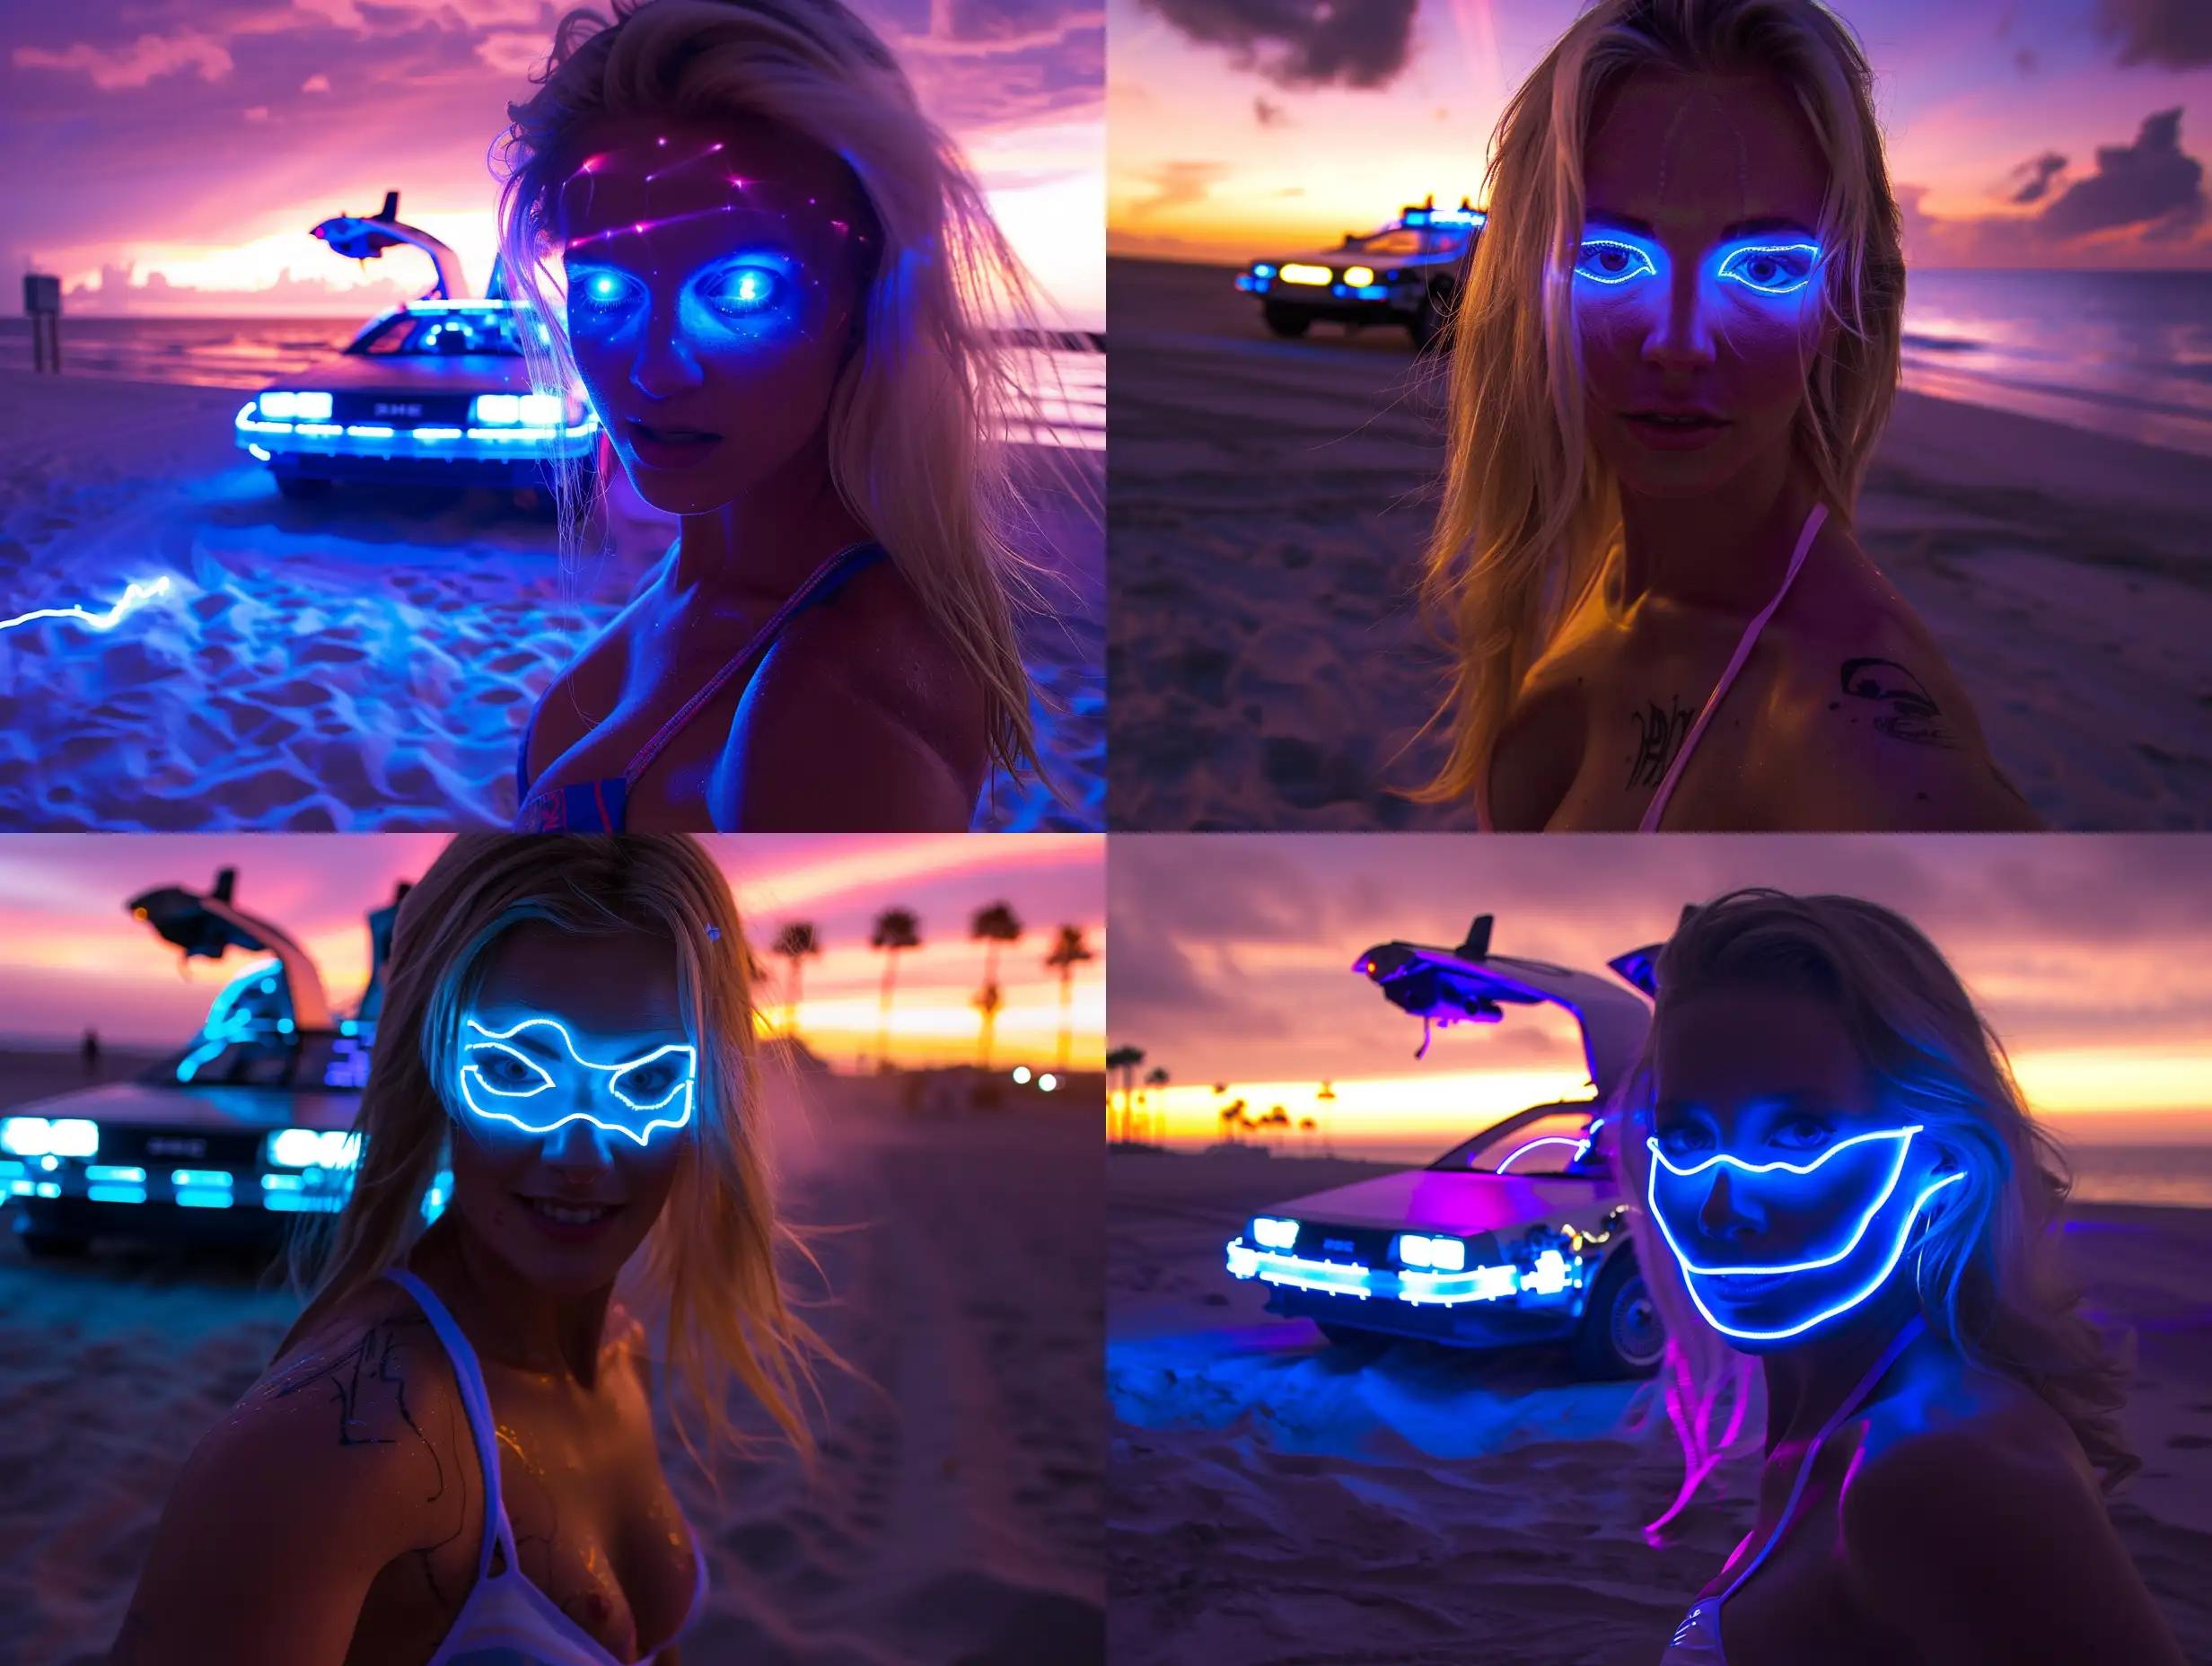 Blonde in bikini in foreground close to camera with face lit up, with Back to the future delorean in background on Beach at sunset. Lit up, scifi, futuristic, vivid blue lightning, purple sky, smoky, fire trails, artistic, bright, masterpiece, stunning,